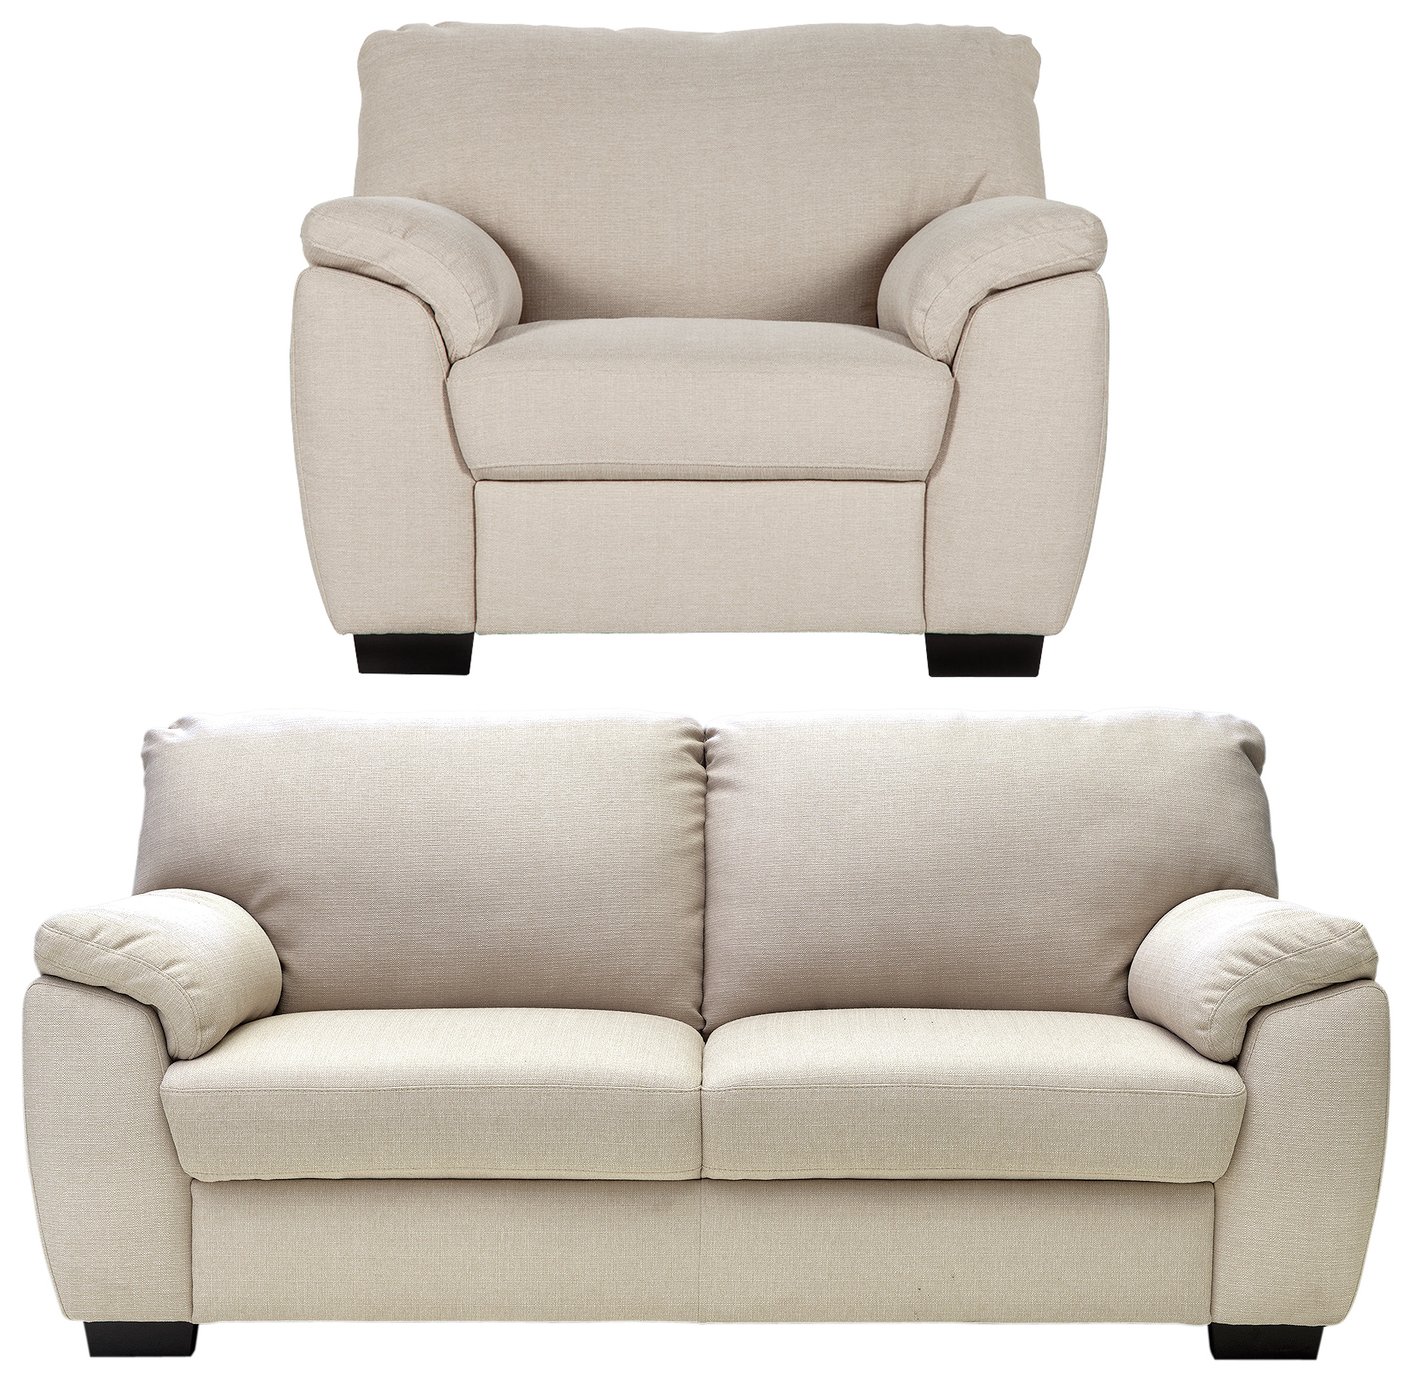 Argos Home Milano Fabric Chair and 3 Seater Sofa - Beige